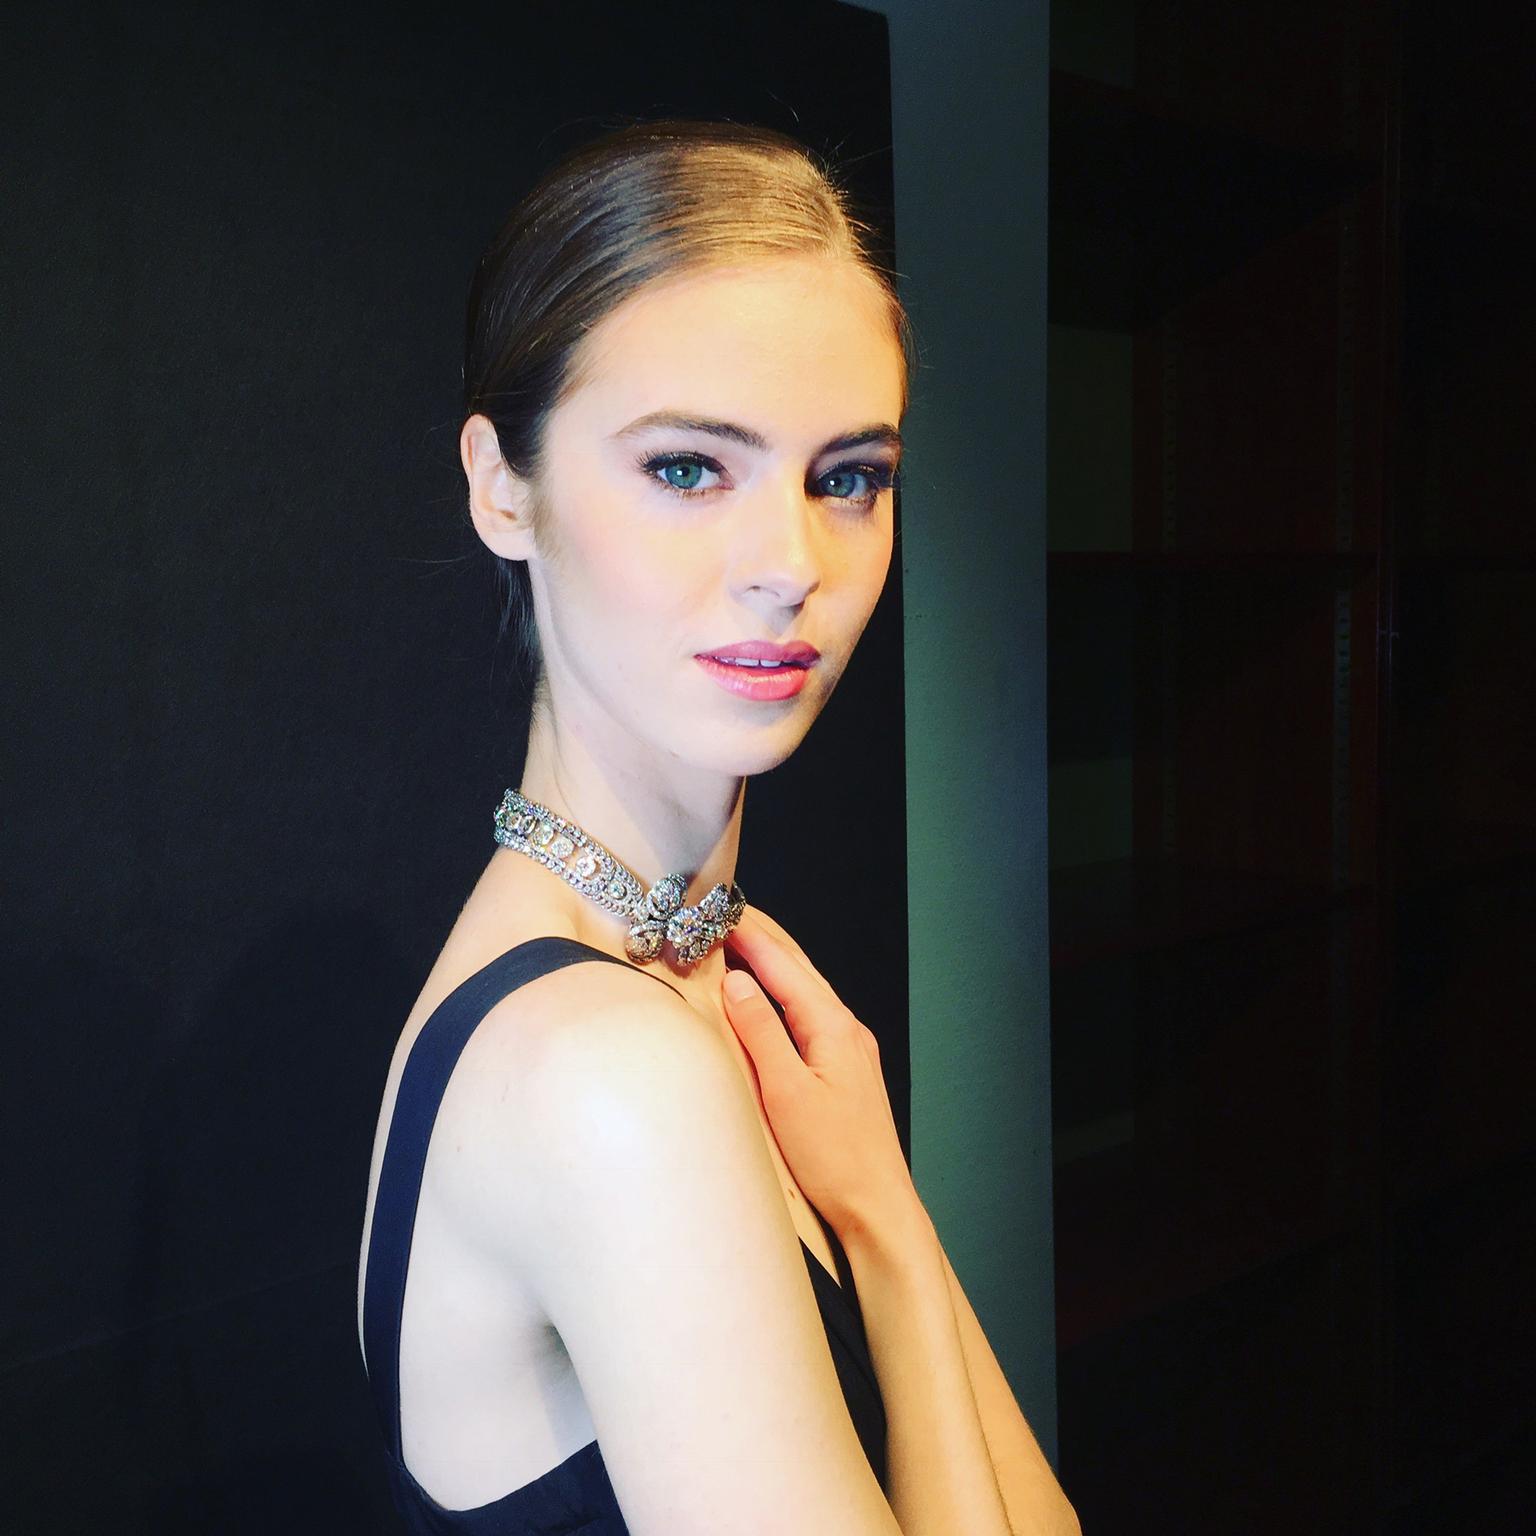 Model wearing Sotheby's Antique diamond necklace